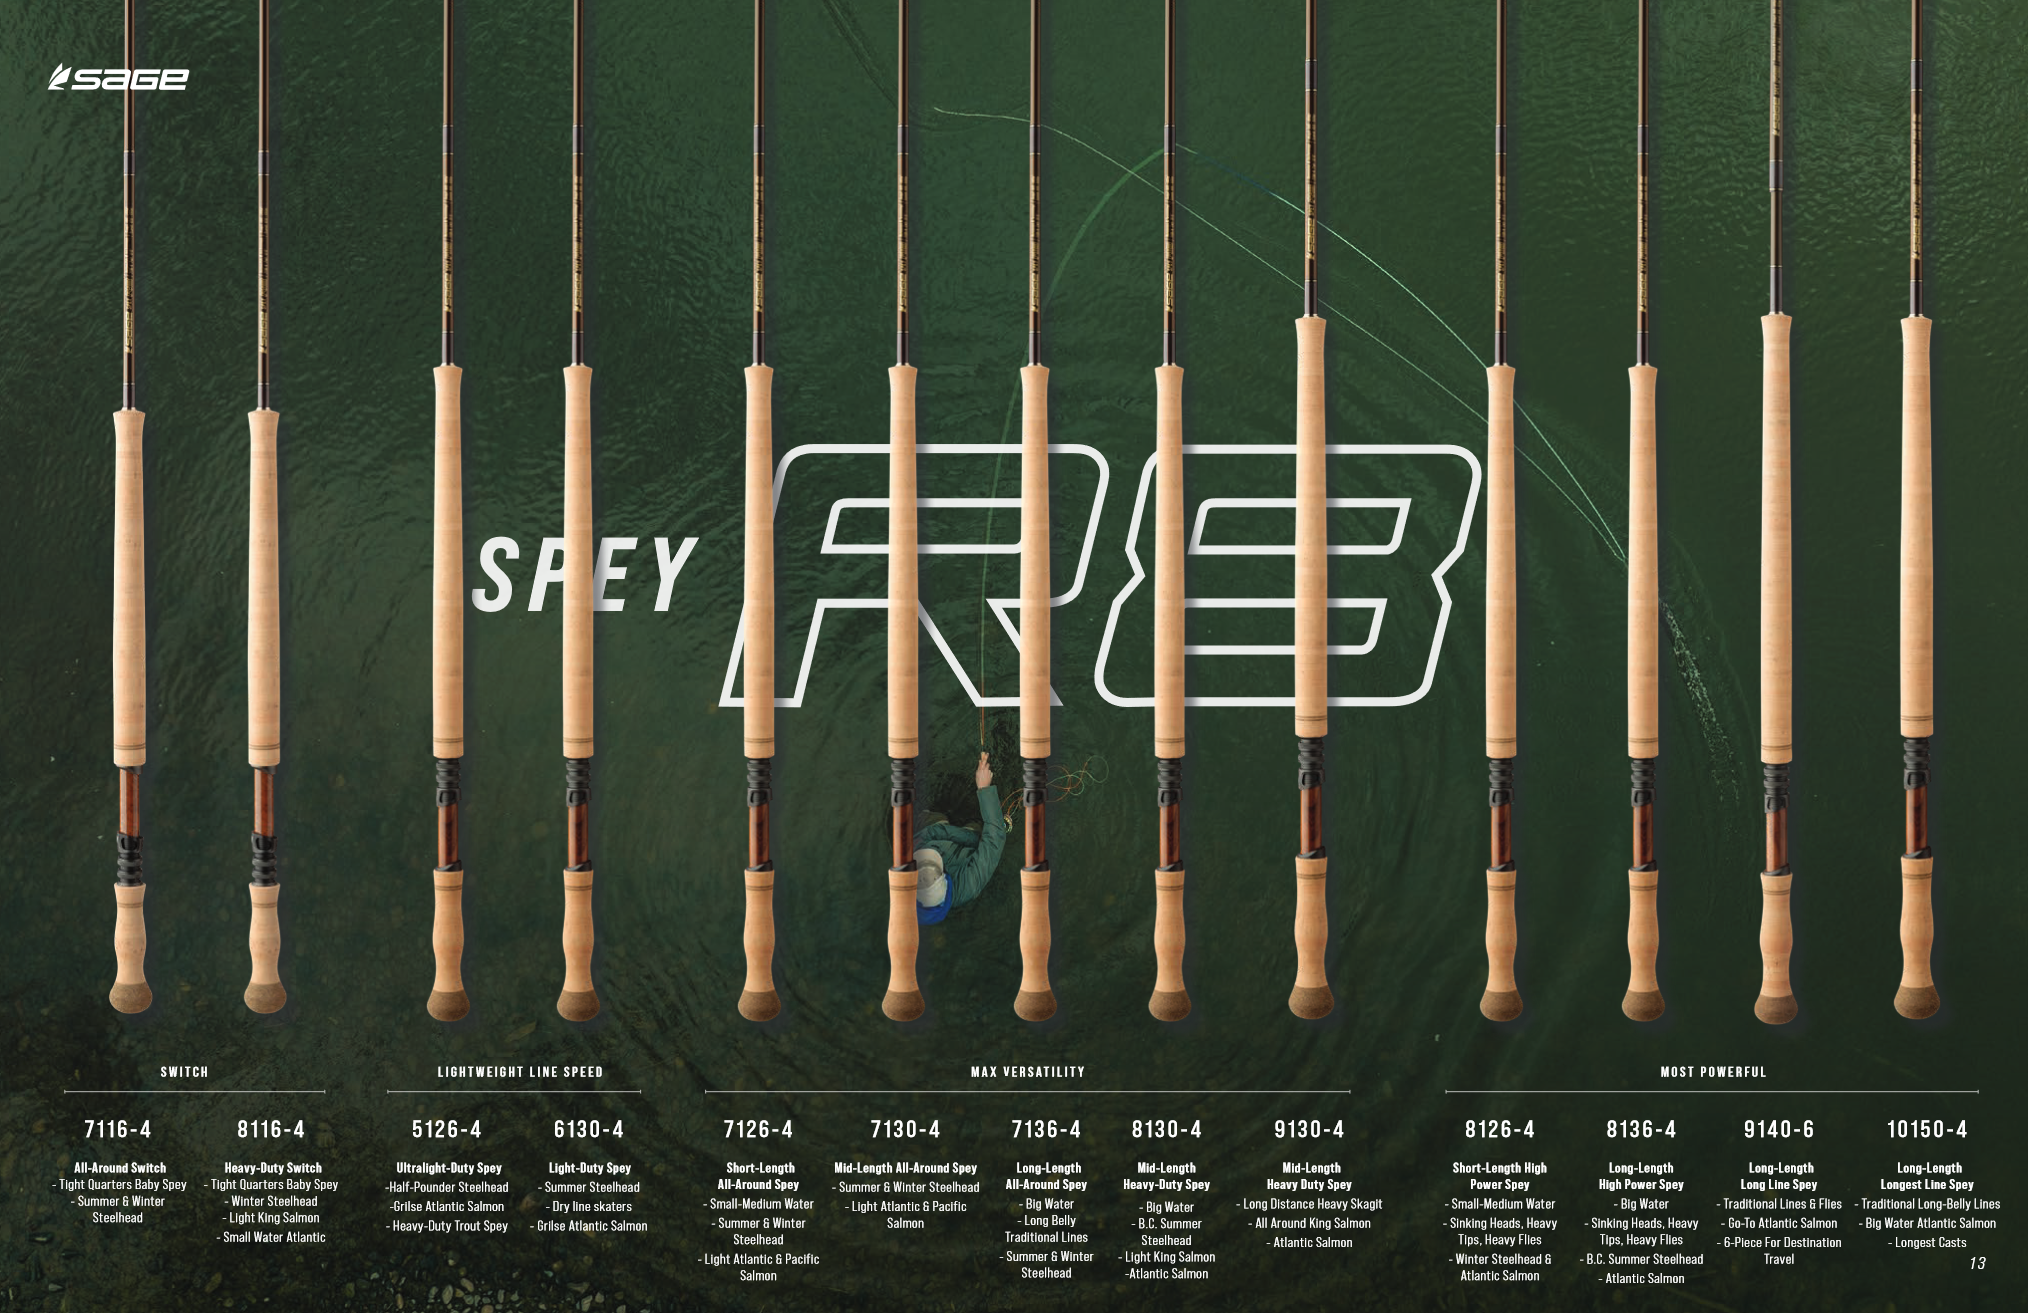 Sage SPEY R8 8126-4 8wt 12'6 The Most Powerful Spey Rods - NEW!